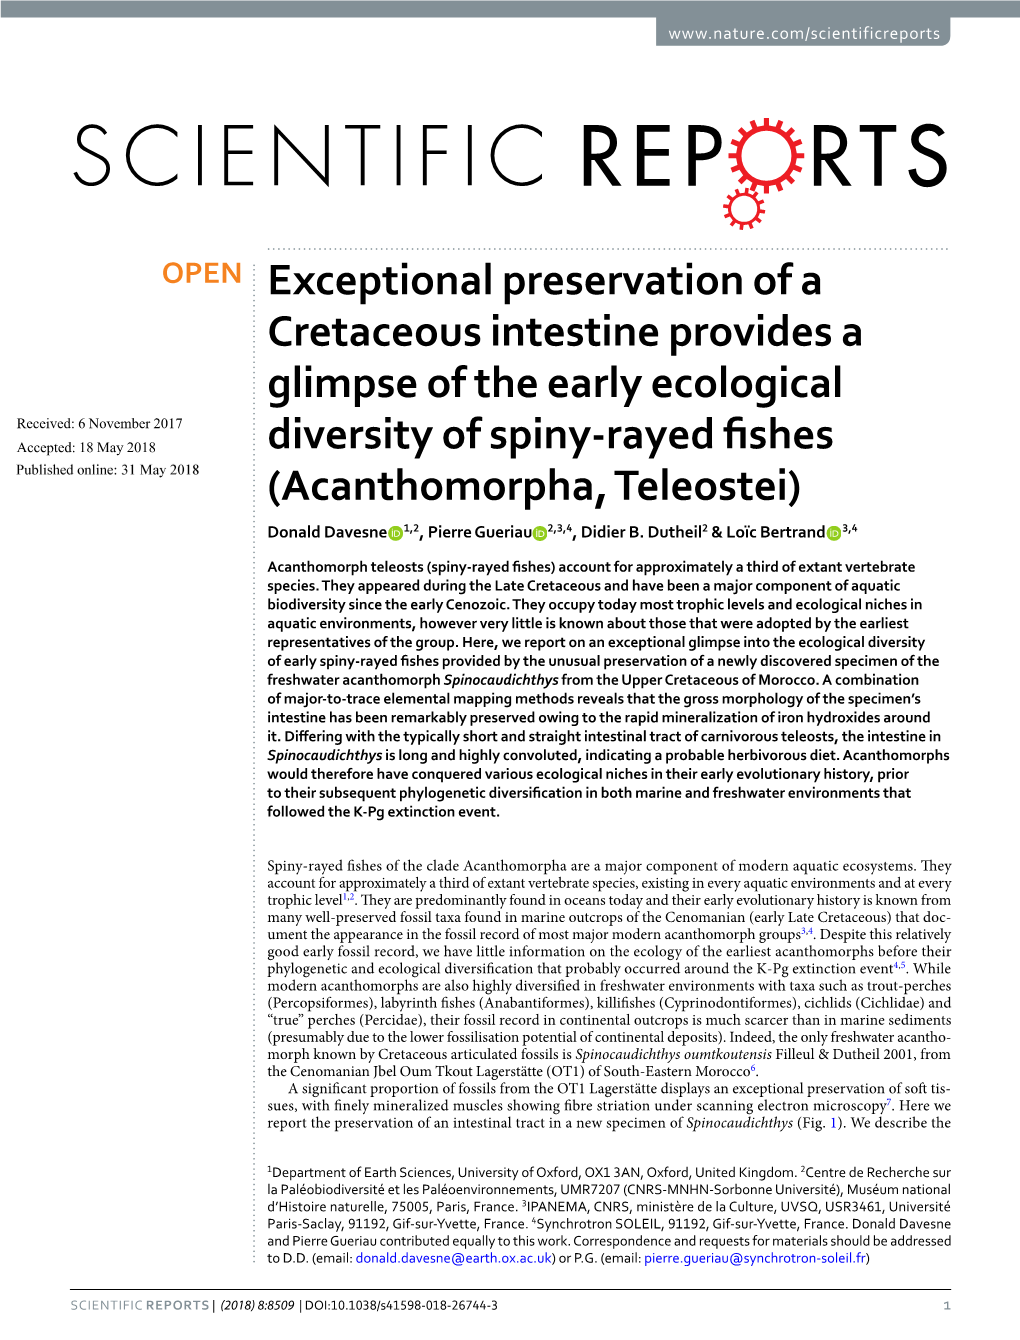 Exceptional Preservation of a Cretaceous Intestine Provides A